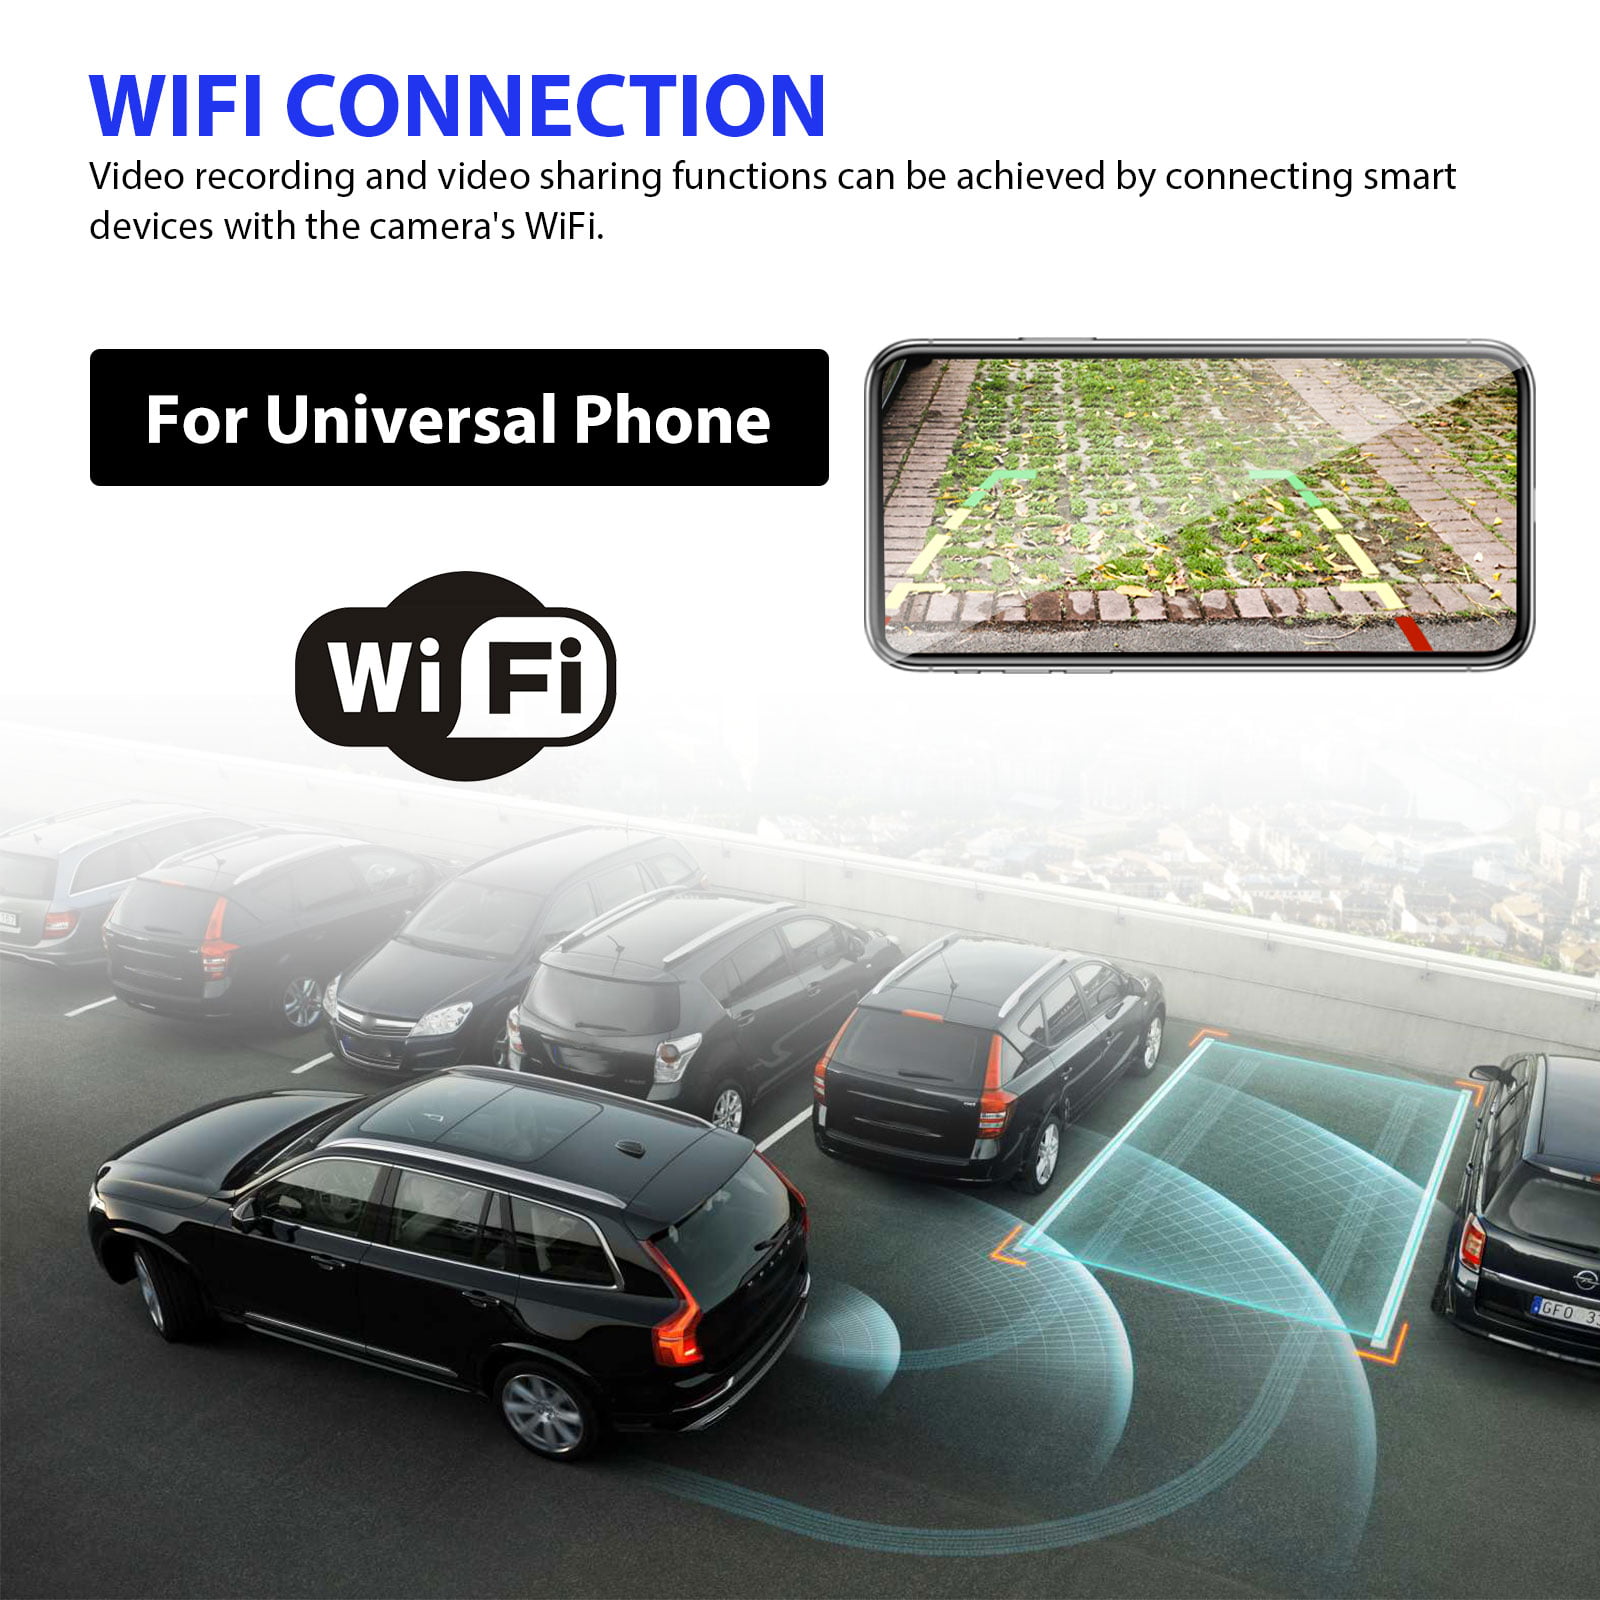 WiFi Metal Frame License Plate Night Vision Rearview Camera Phone APP Connection